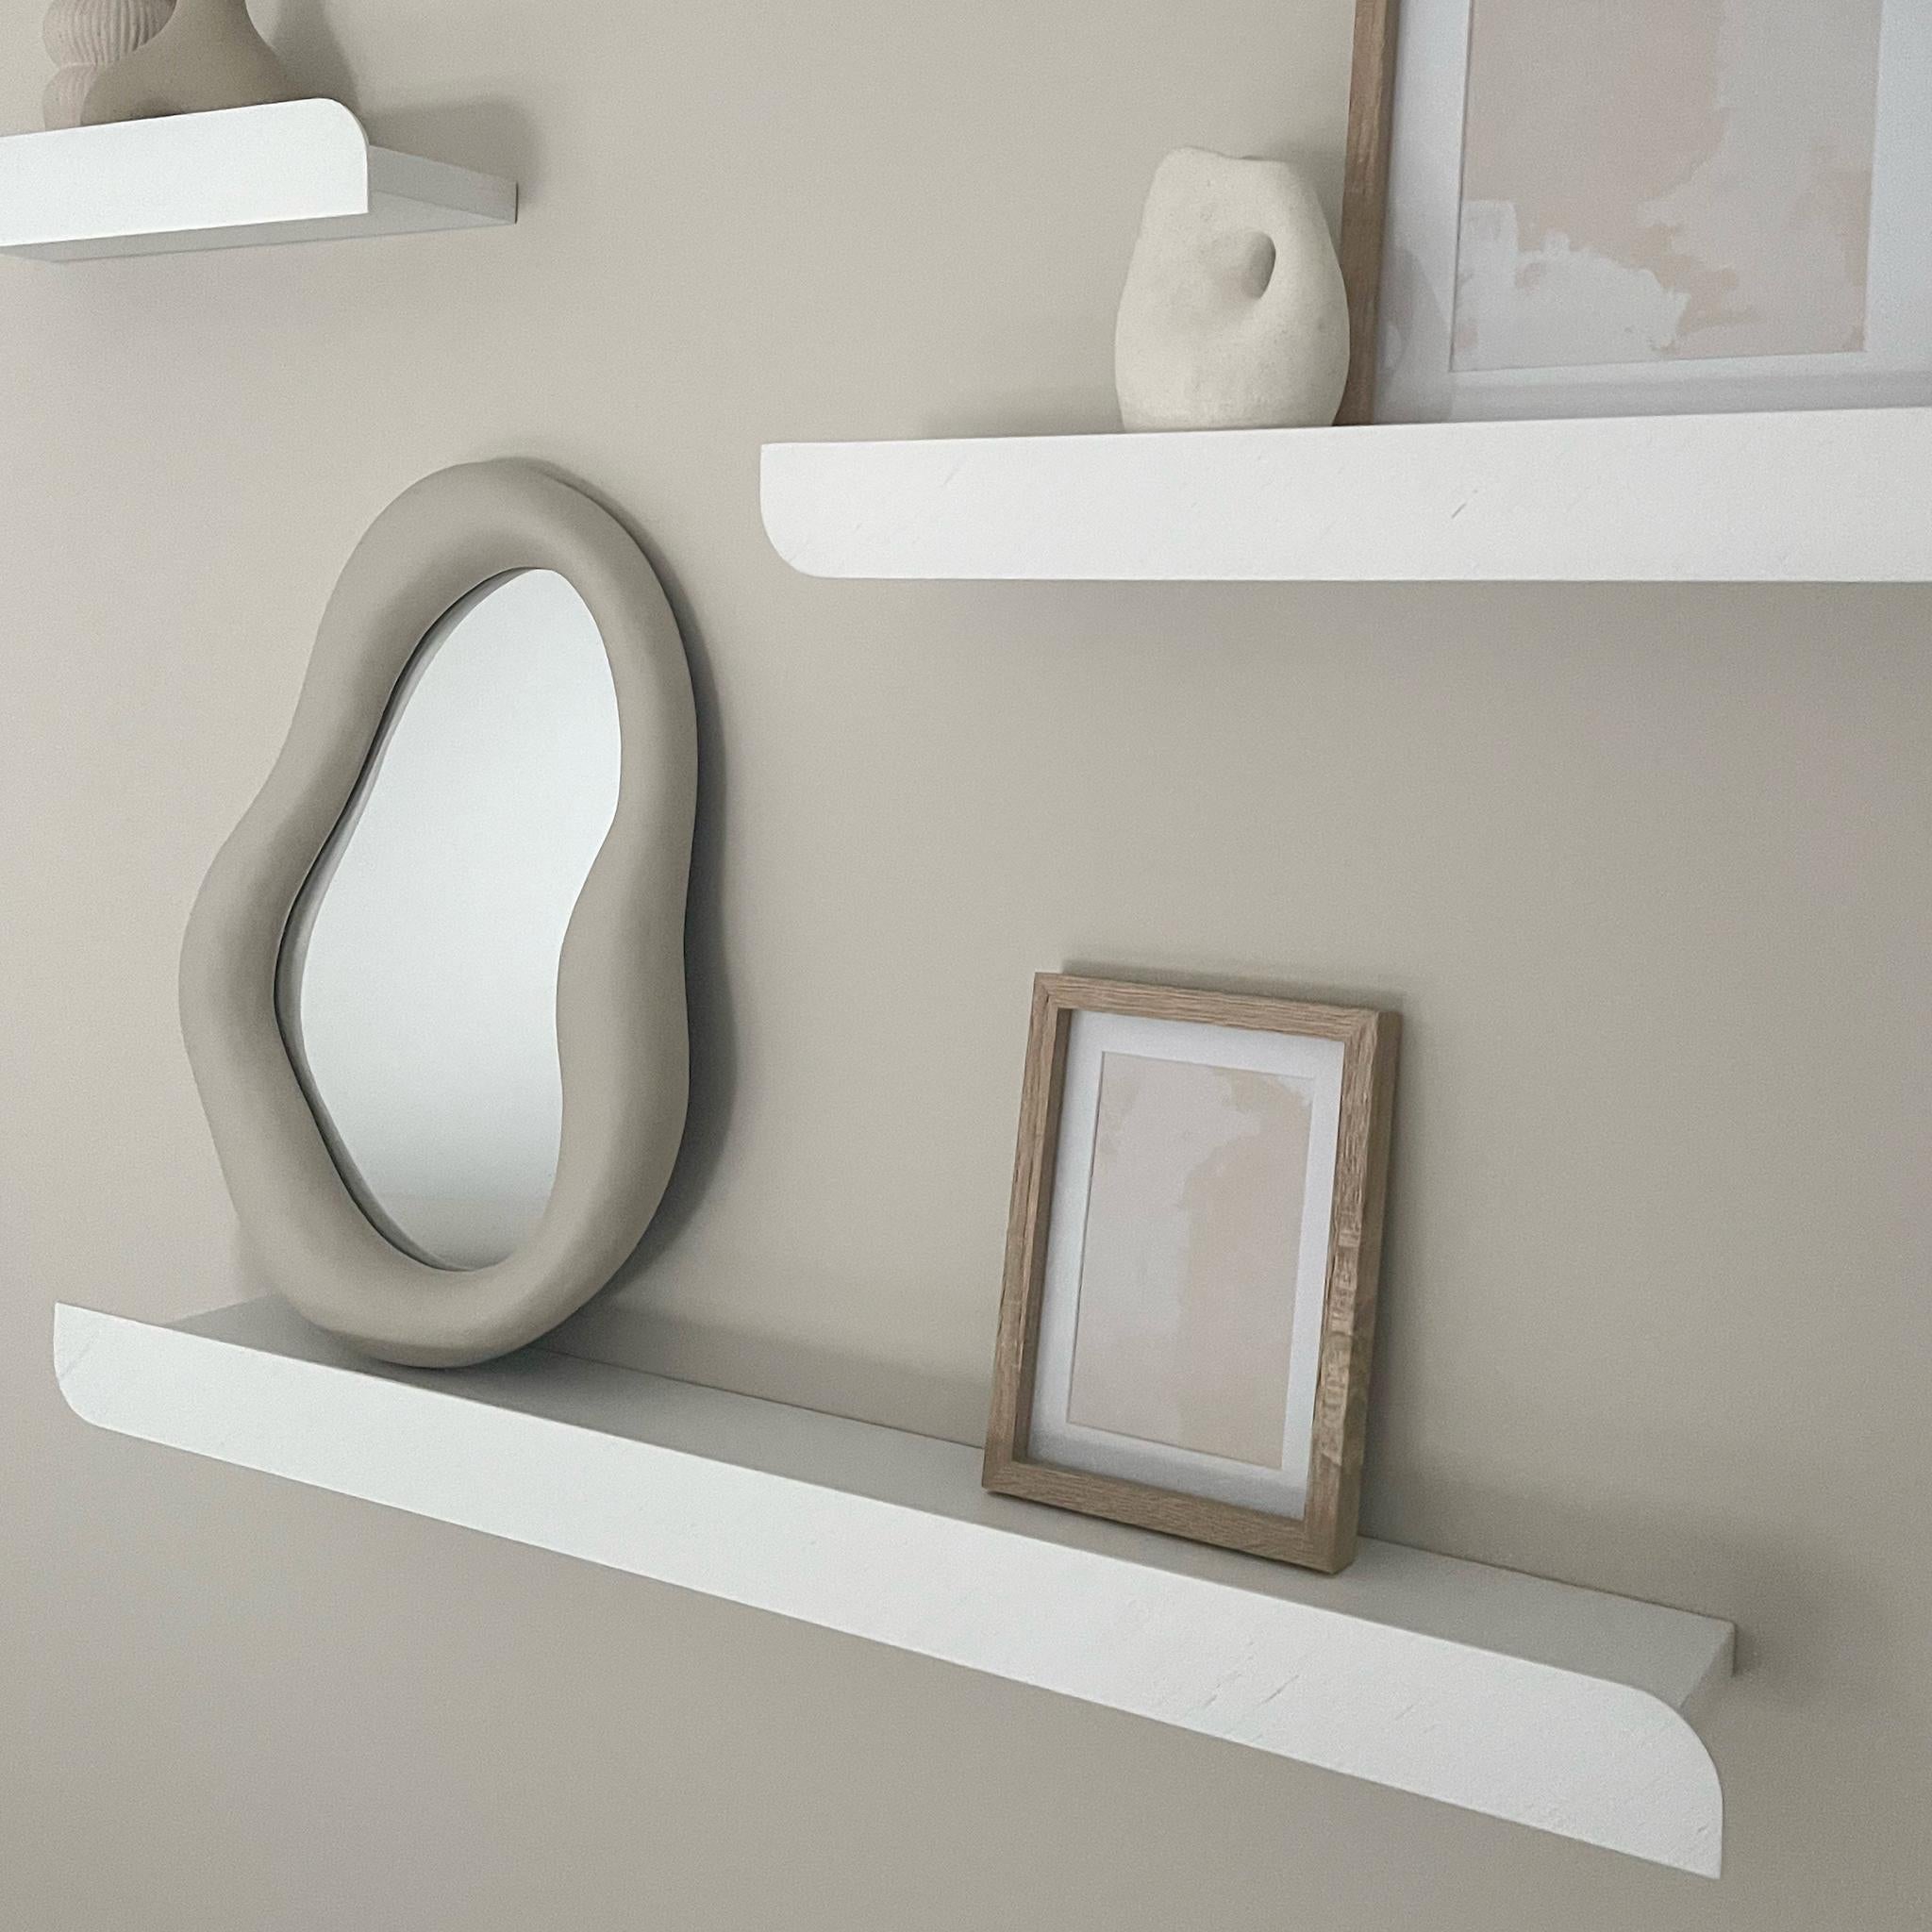 Our Cielo Shelf is a unique minimalist wall piece perfect for placing decoration with a careful design that highlights its wood vein and includes a front ledge. Its design is complemented by the collection’s iconic leaf shape that represents